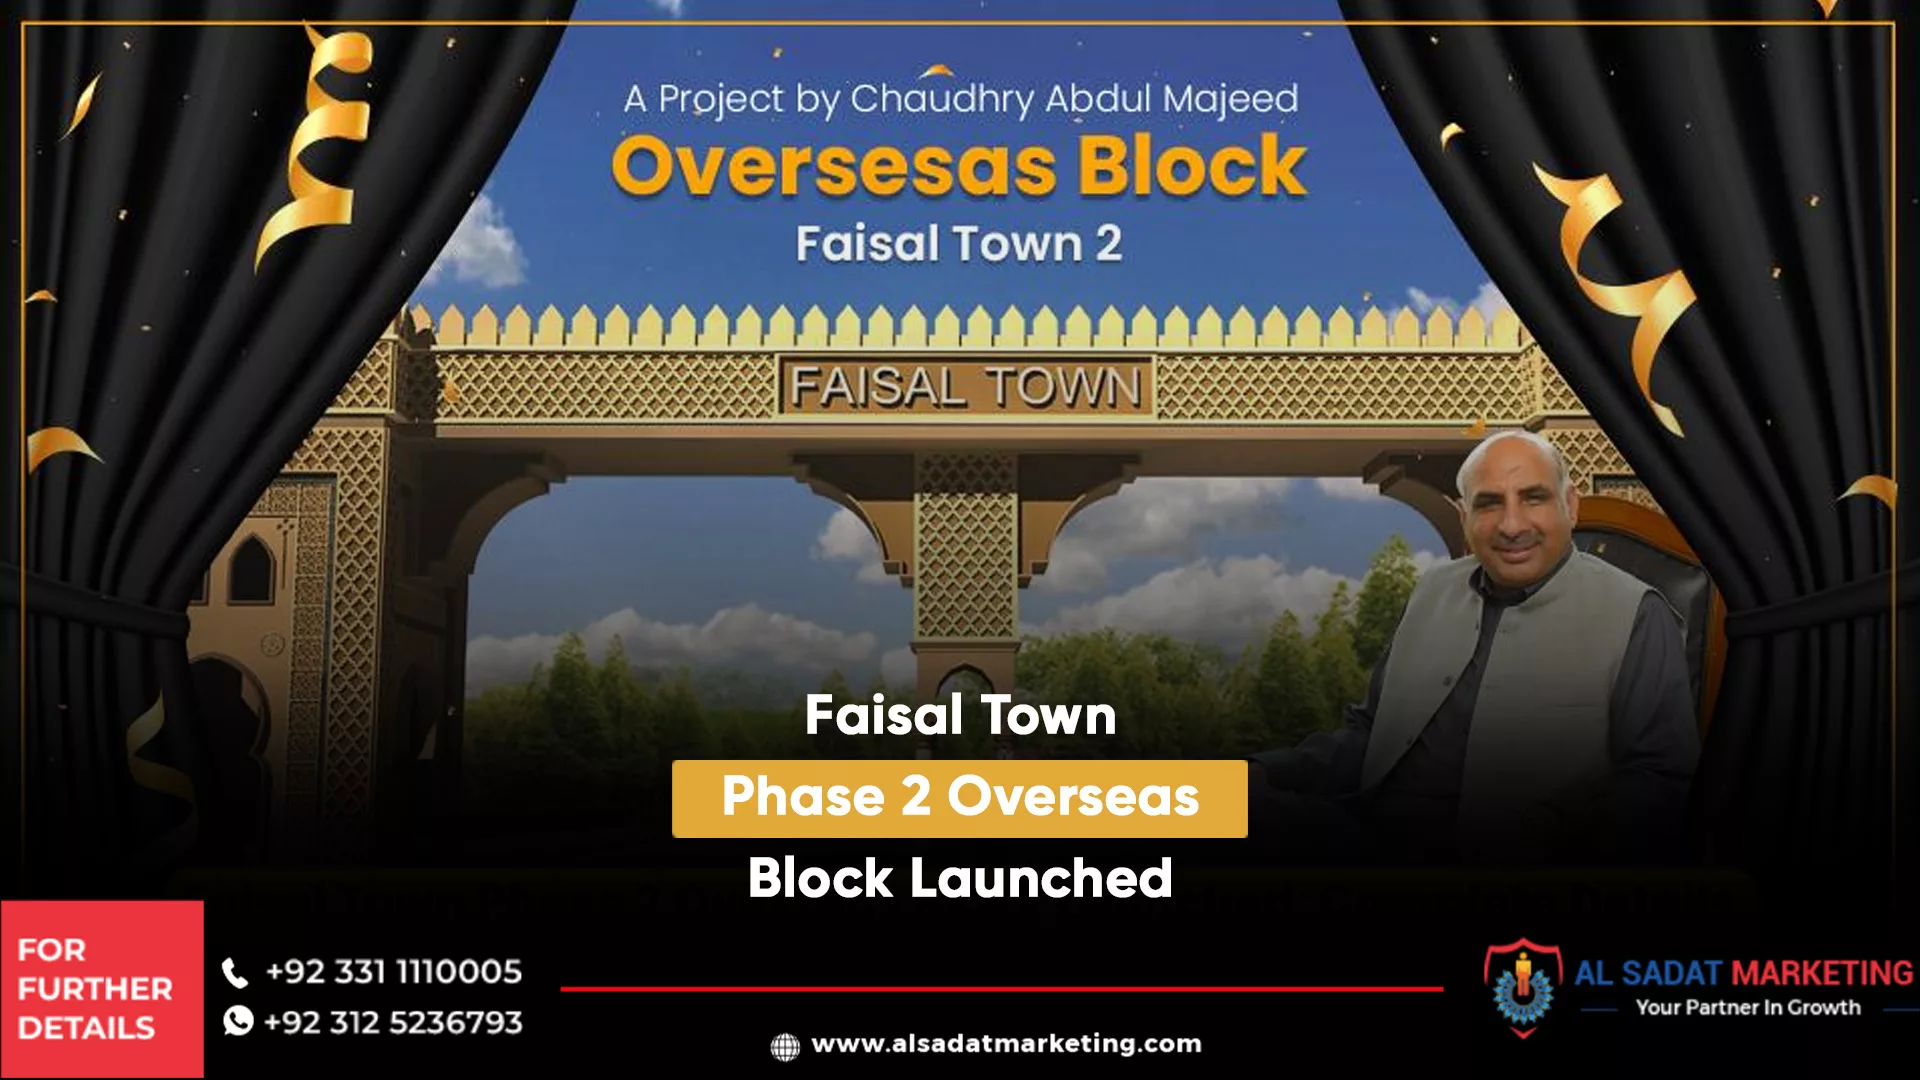 faisal town phase 2 overseas block launched: complete details, al sadat marketing, real estate agency in blue area islamabad